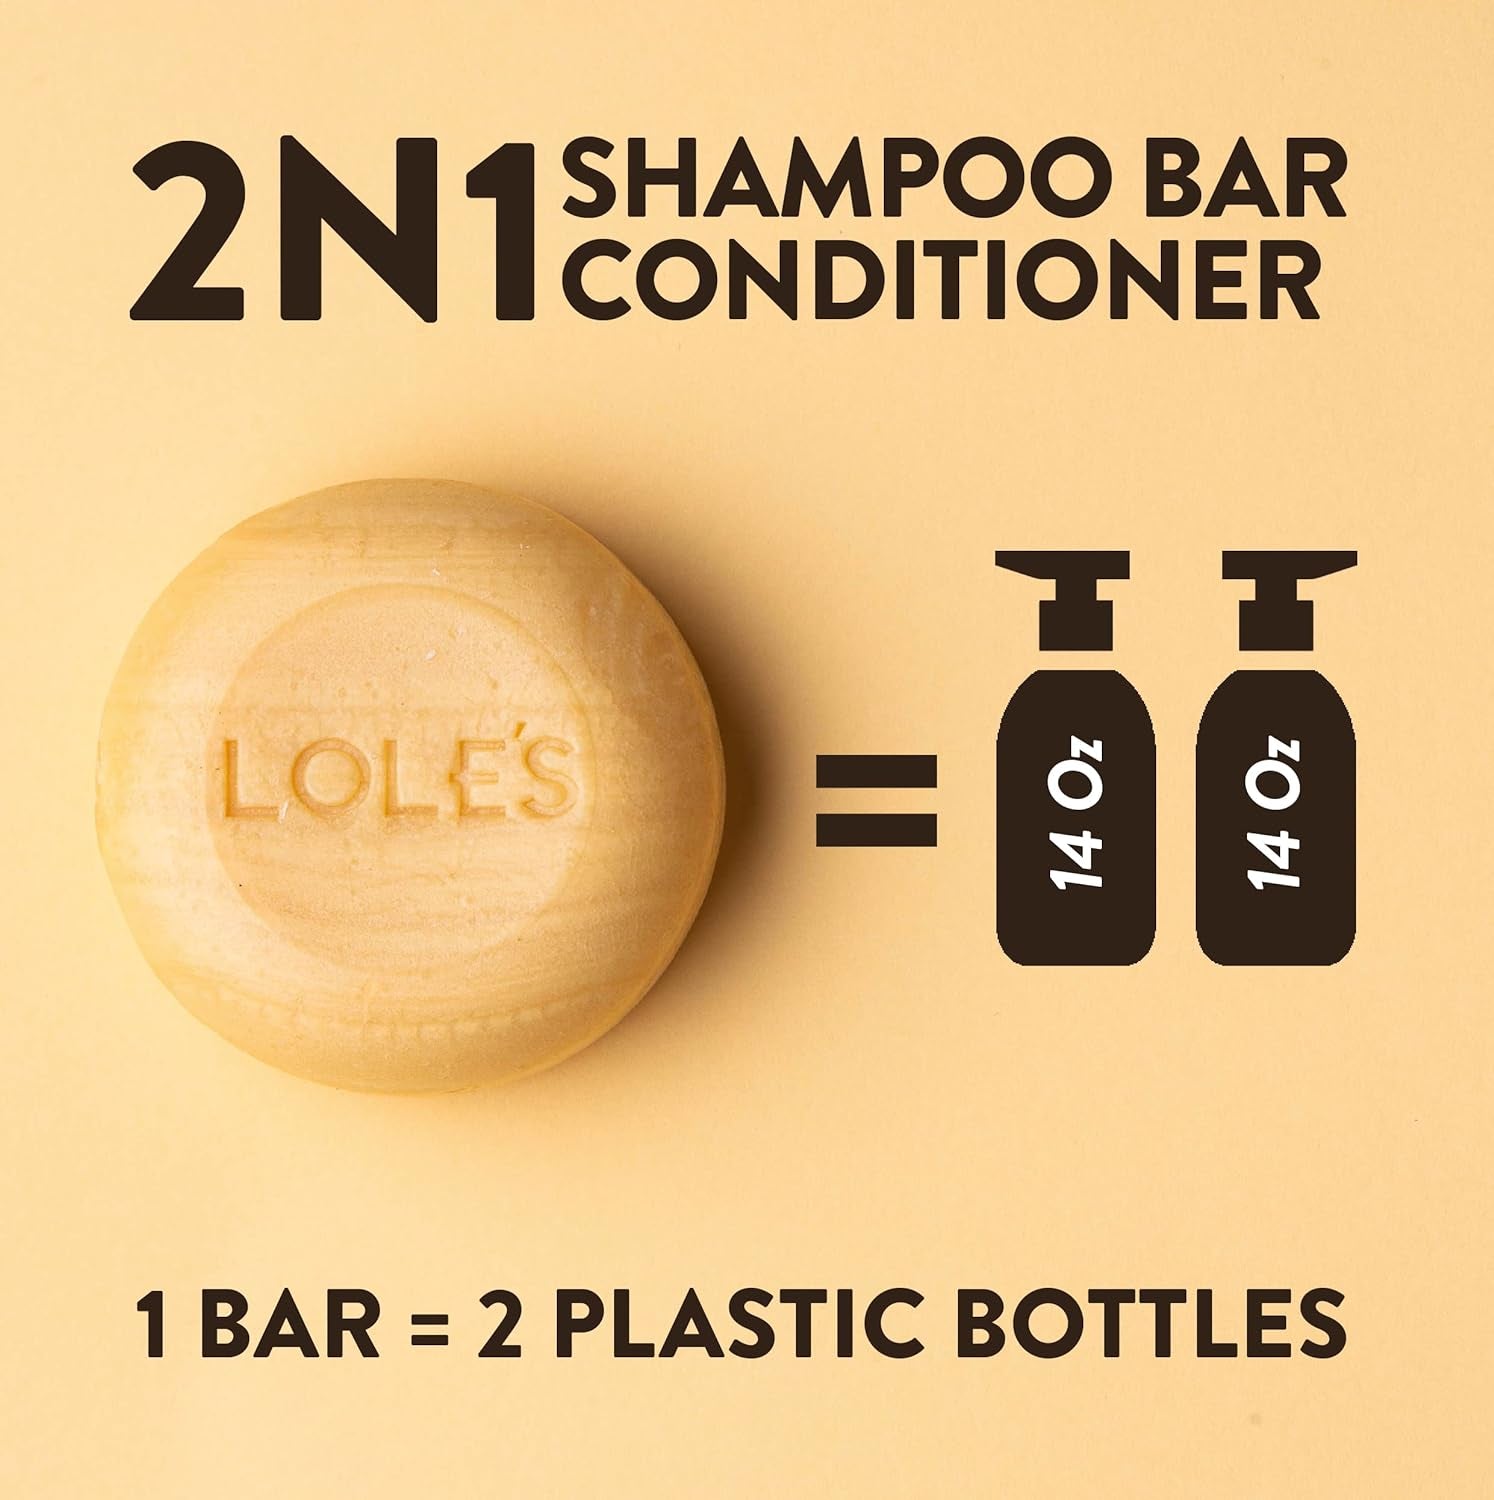 Shampoo Bar & Conditioner 2In1 with Jojoba Oil for Itchy Scalp & Dandruff, Moisturizes & Cleans Scalp, 99% Natural Origin Ingredients, Sustainably Sourced Beeswax, Free from Preservatives, Silicones, Soap, & Dyes, with Plastic Free Packaging, 3.5 Oz